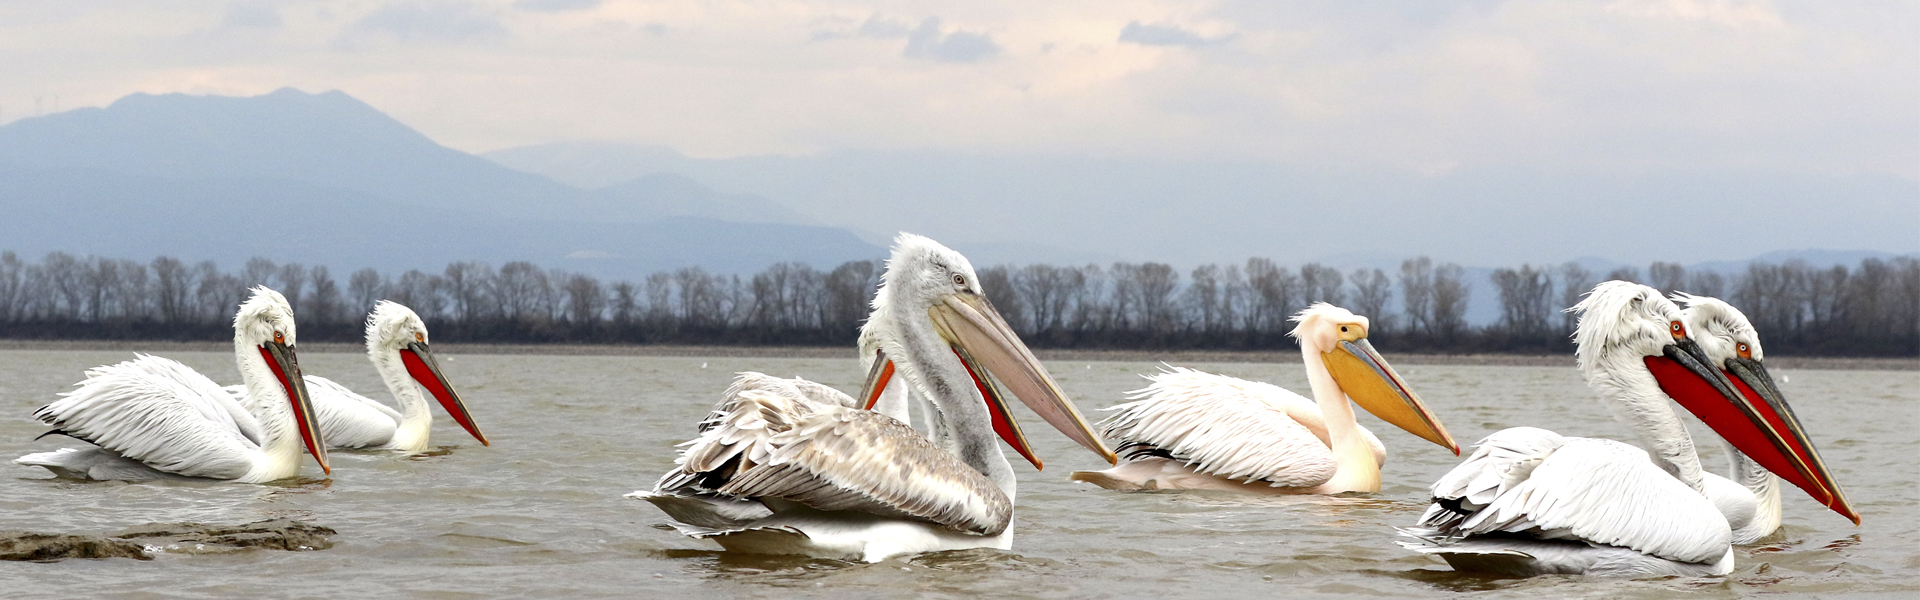 Another Dalmatian Pelican tagged in Western Greece by HOS